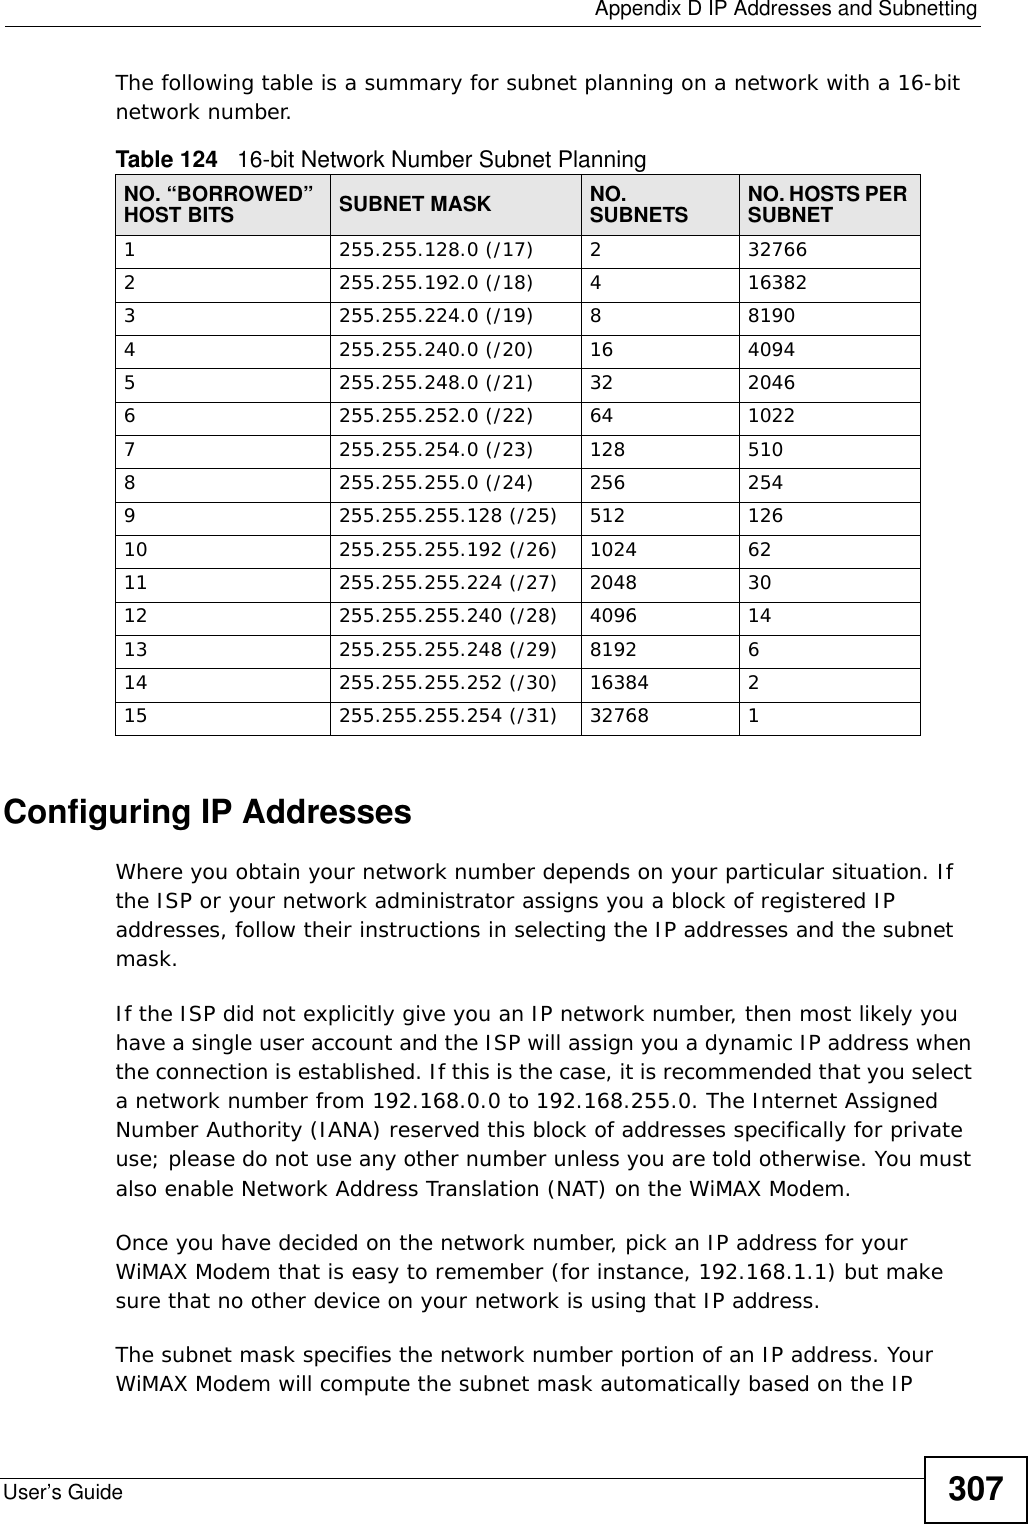  Appendix D IP Addresses and SubnettingUser’s Guide 307The following table is a summary for subnet planning on a network with a 16-bit network number. Configuring IP AddressesWhere you obtain your network number depends on your particular situation. If the ISP or your network administrator assigns you a block of registered IP addresses, follow their instructions in selecting the IP addresses and the subnet mask.If the ISP did not explicitly give you an IP network number, then most likely you have a single user account and the ISP will assign you a dynamic IP address when the connection is established. If this is the case, it is recommended that you select a network number from 192.168.0.0 to 192.168.255.0. The Internet Assigned Number Authority (IANA) reserved this block of addresses specifically for private use; please do not use any other number unless you are told otherwise. You must also enable Network Address Translation (NAT) on the WiMAX Modem. Once you have decided on the network number, pick an IP address for your WiMAX Modem that is easy to remember (for instance, 192.168.1.1) but make sure that no other device on your network is using that IP address.The subnet mask specifies the network number portion of an IP address. Your WiMAX Modem will compute the subnet mask automatically based on the IP Table 124   16-bit Network Number Subnet PlanningNO. “BORROWED” HOST BITS SUBNET MASK NO. SUBNETS NO. HOSTS PER SUBNET1255.255.128.0 (/17) 2327662255.255.192.0 (/18) 4163823255.255.224.0 (/19) 881904255.255.240.0 (/20) 16 40945255.255.248.0 (/21) 32 20466255.255.252.0 (/22) 64 10227255.255.254.0 (/23) 128 5108255.255.255.0 (/24) 256 2549255.255.255.128 (/25) 512 12610 255.255.255.192 (/26) 1024 6211 255.255.255.224 (/27) 2048 3012 255.255.255.240 (/28) 4096 1413 255.255.255.248 (/29) 8192 614 255.255.255.252 (/30) 16384 215 255.255.255.254 (/31) 32768 1